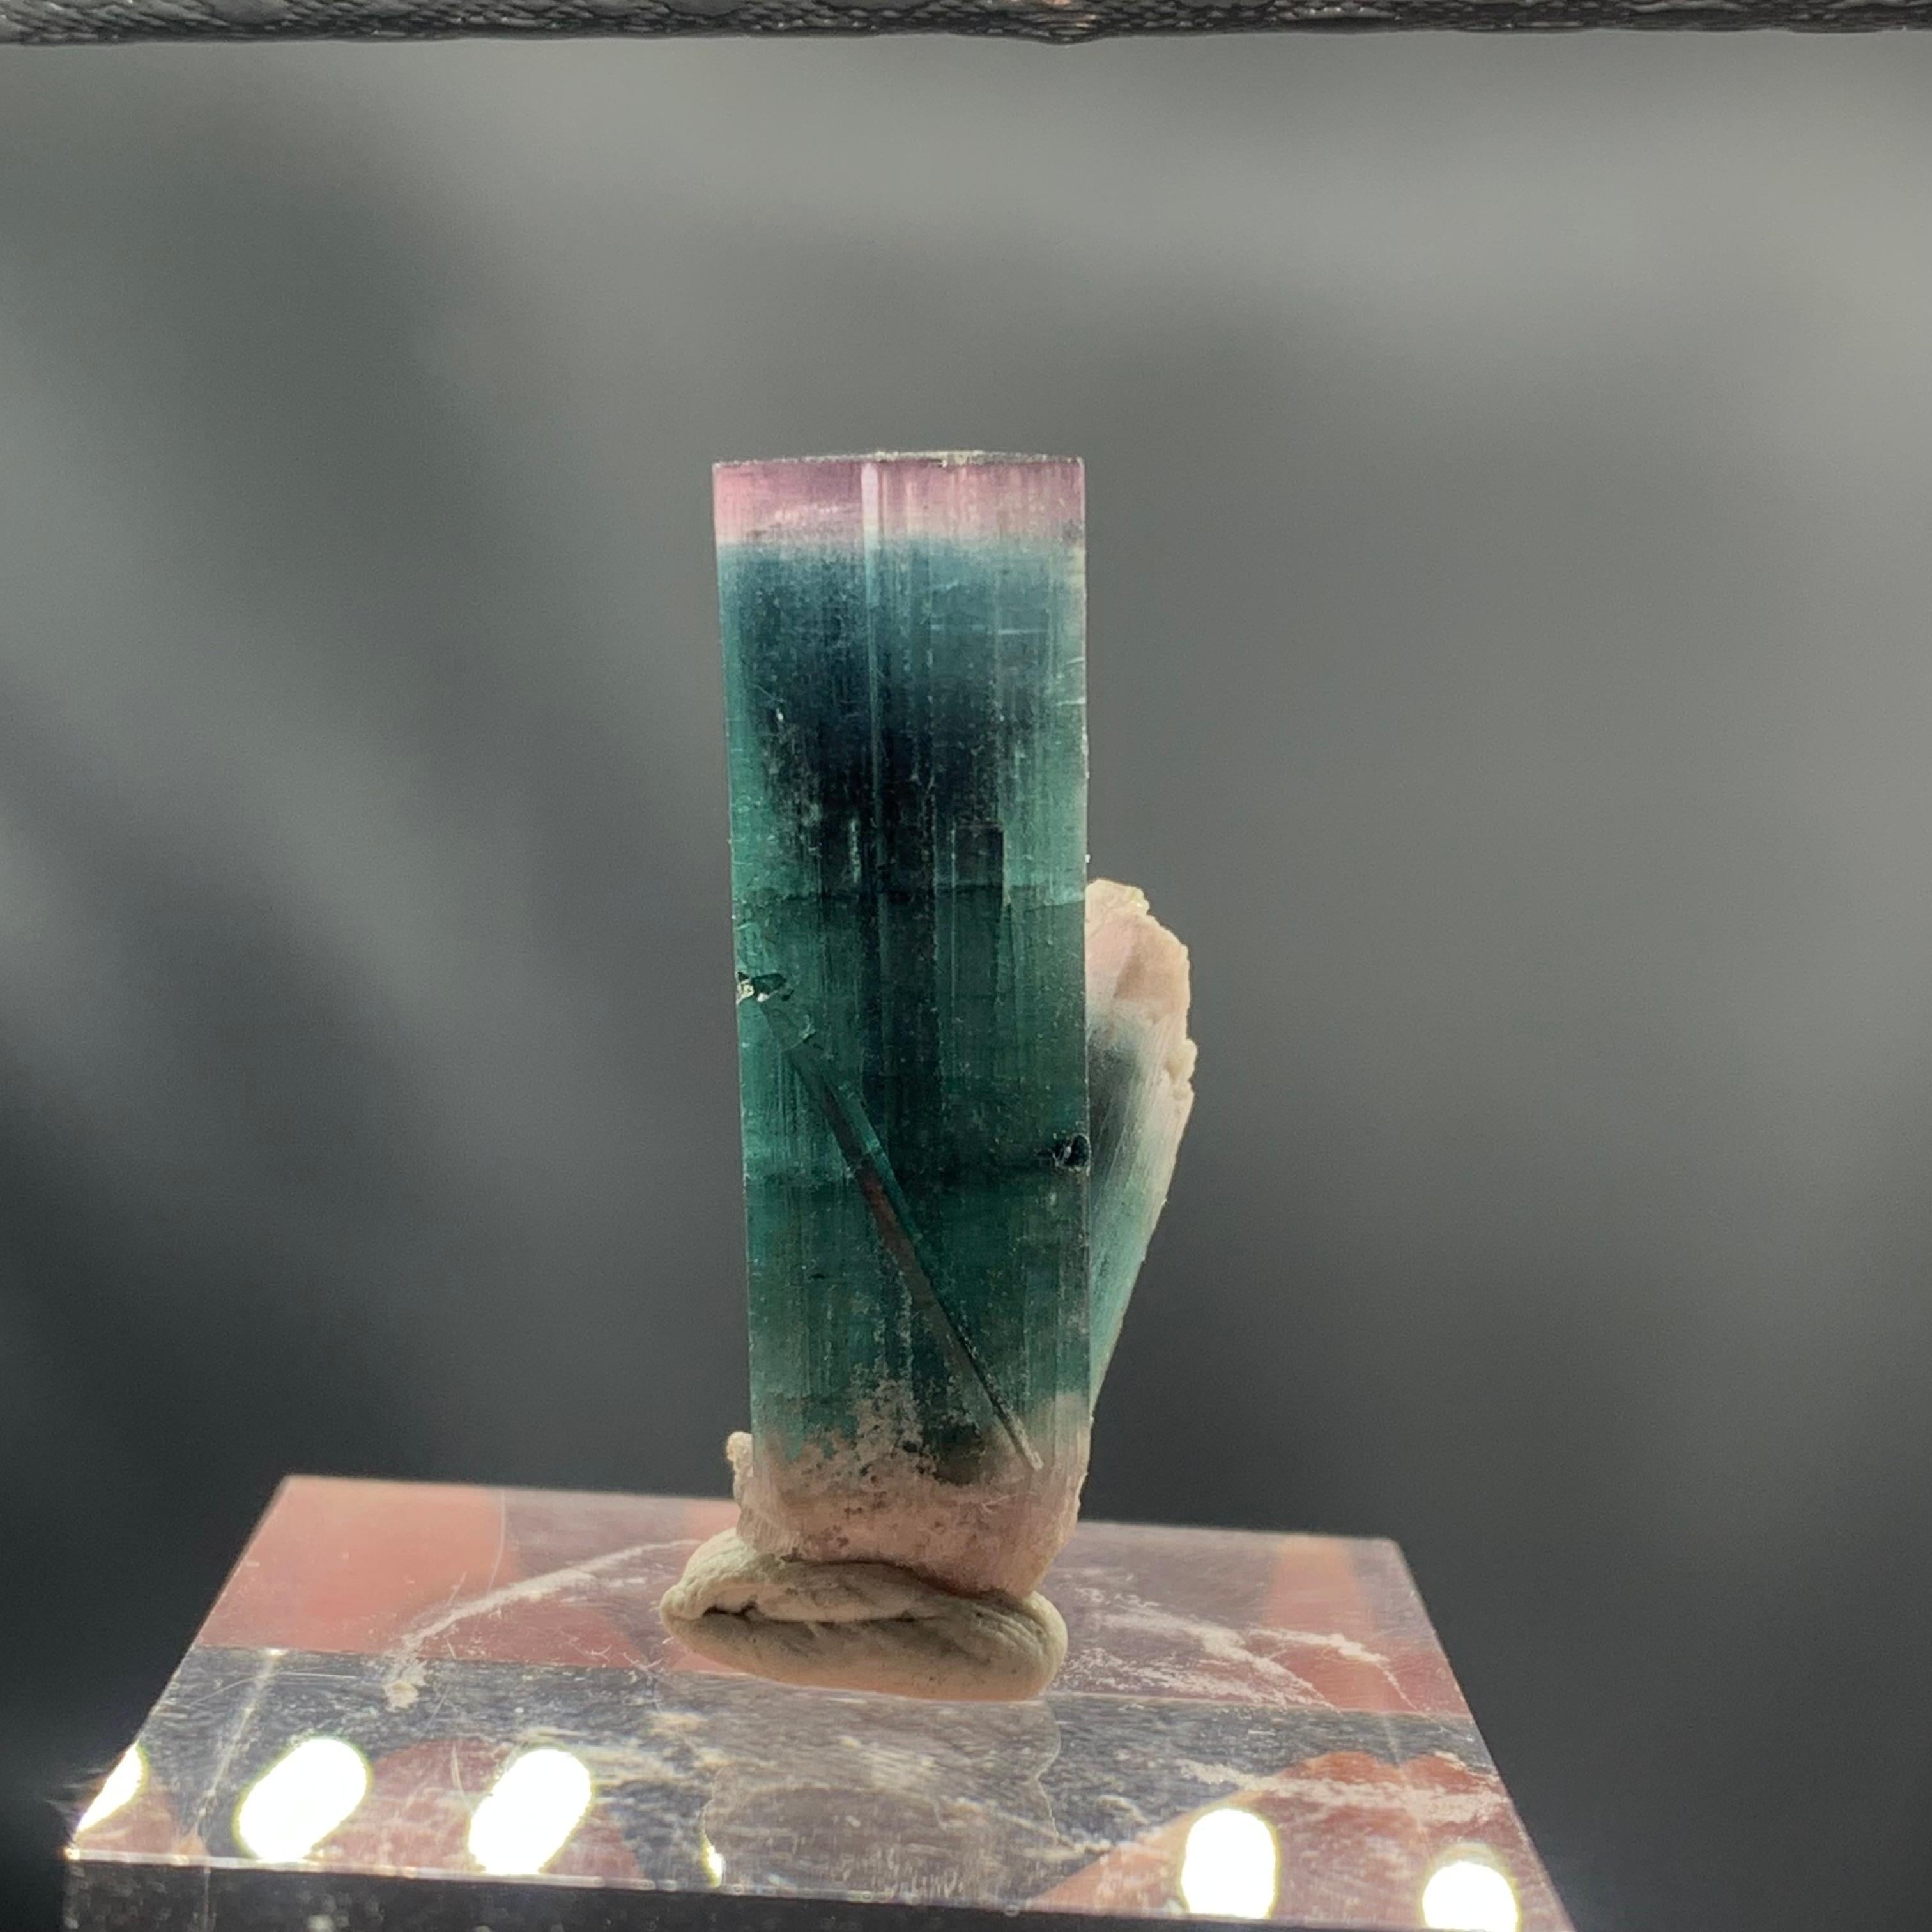 Incredible 20.30 Carat Bi Color Tourmaline Specimen From Kunar Afghanistan 
WEIGHT: 20.30 grams
DIMENSION: 2.8 x 1.2 x 0.9 Cm
ORIGIN : Kunar Afghanistan
TREATMENT: None
Tourmaline is an extremely popular gemstone; the name Tourmaline is derived